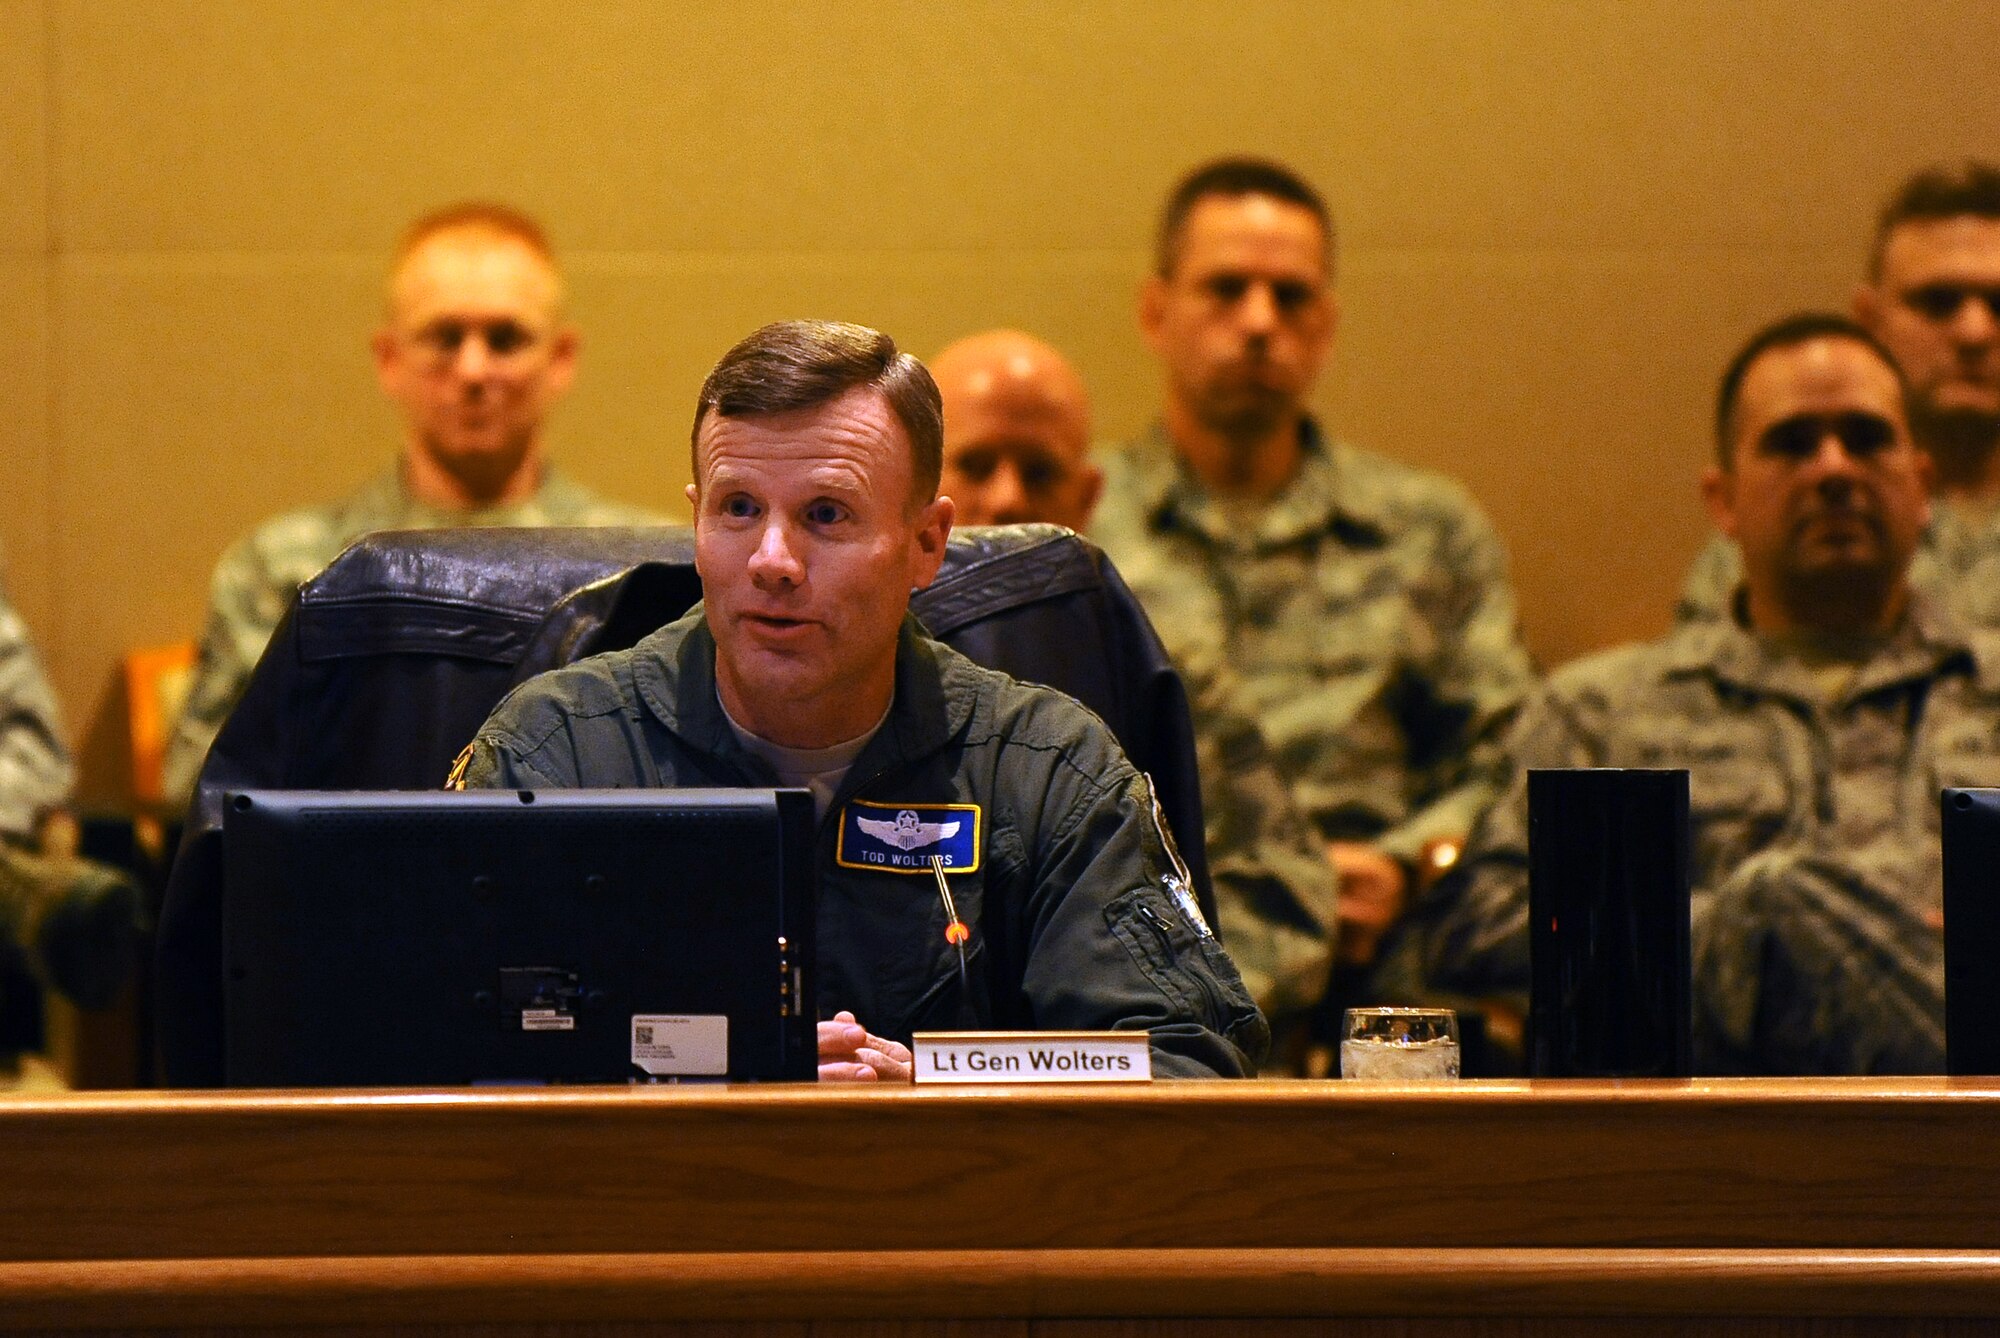 U.S. Air Force Lt. Gen. Tod D. Wolters, 12th Air Force (AFSOUTH) commander, meets with wing leadership at the Dougherty Conference Center shortly after arriving at Offutt Air Force Base, Neb. on Jan. 8. Wolters spent the next 24 hours on a tour of the 55th Wing meeting with the Airmen of the Fightin’ Fifty-Fifth. (U.S. Air Force photo by Josh Plueger/Released)